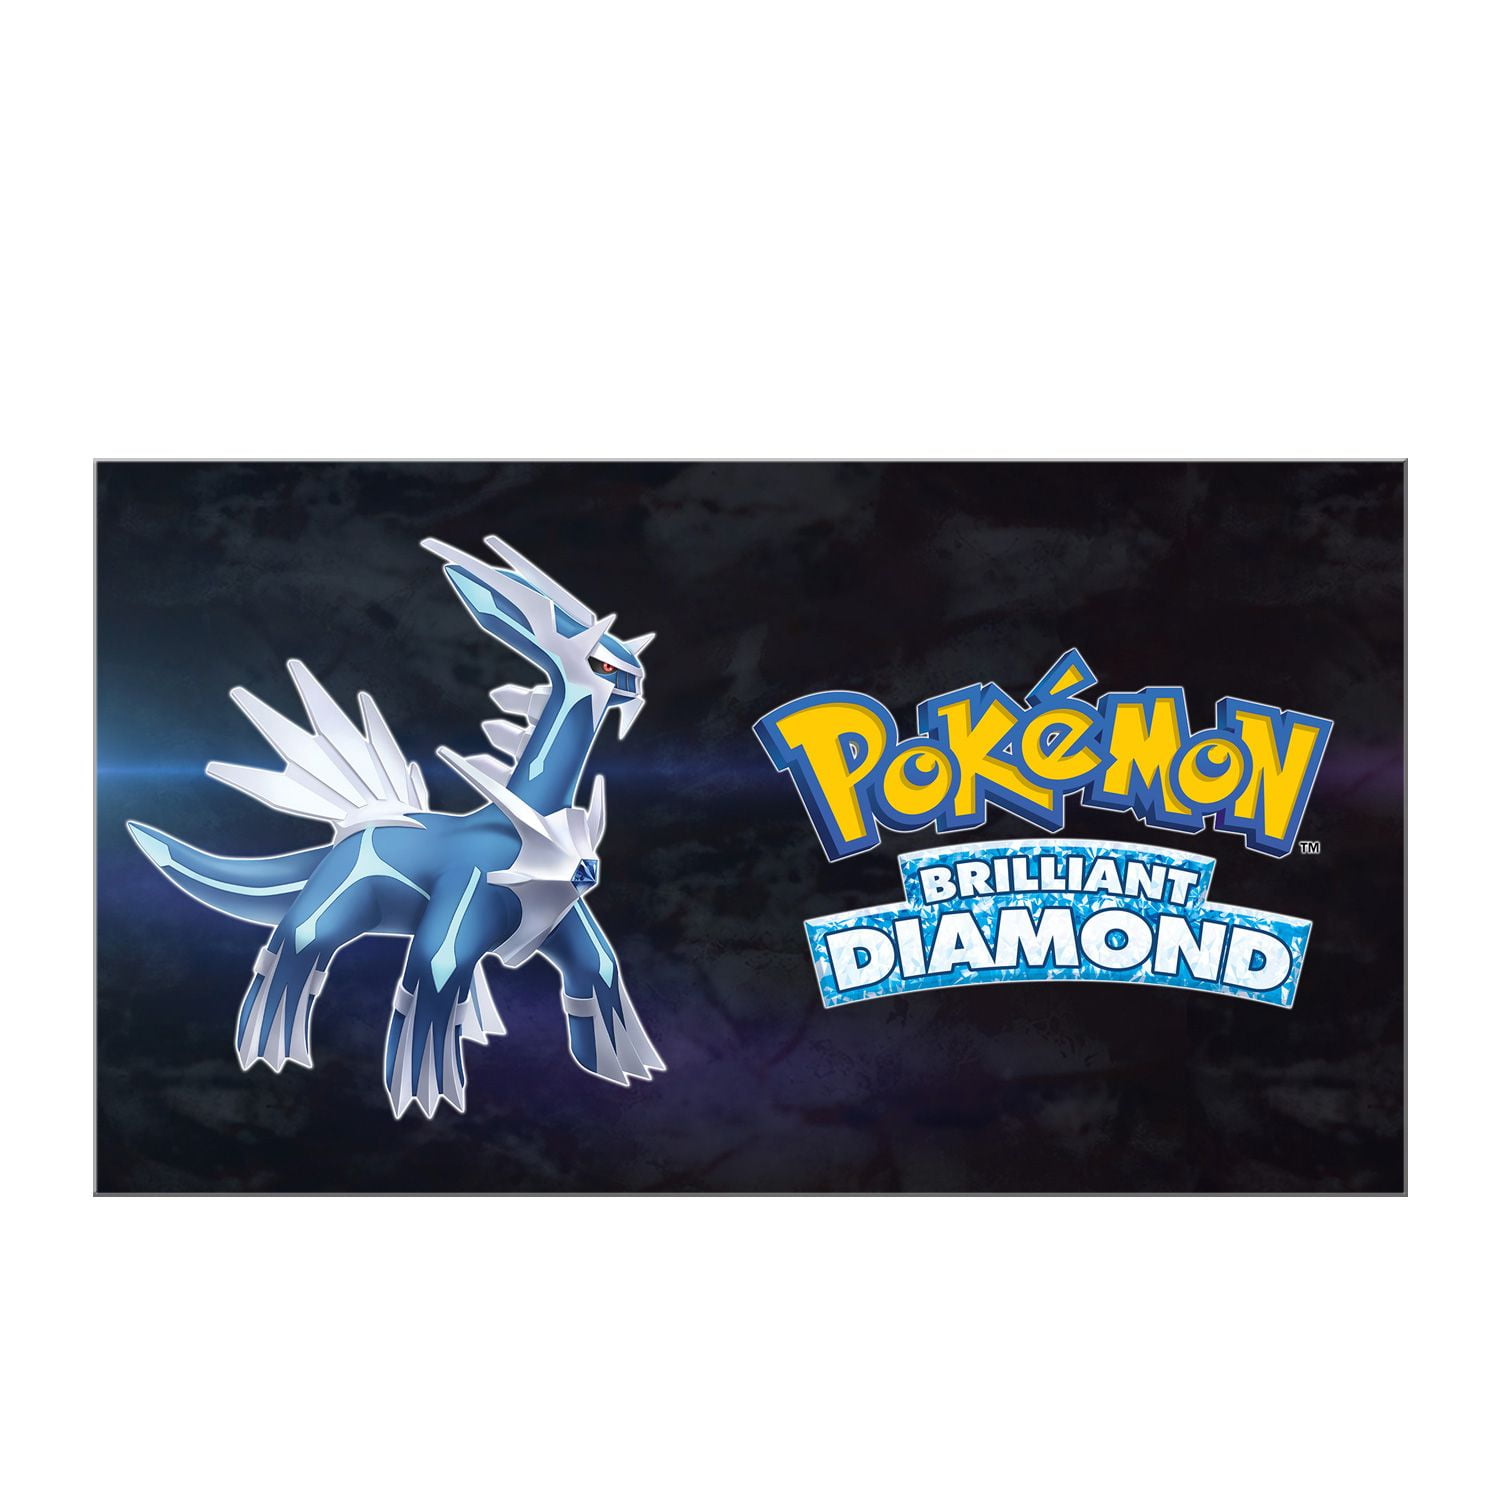 5 important things we now know about Pokemon Brilliant Diamond